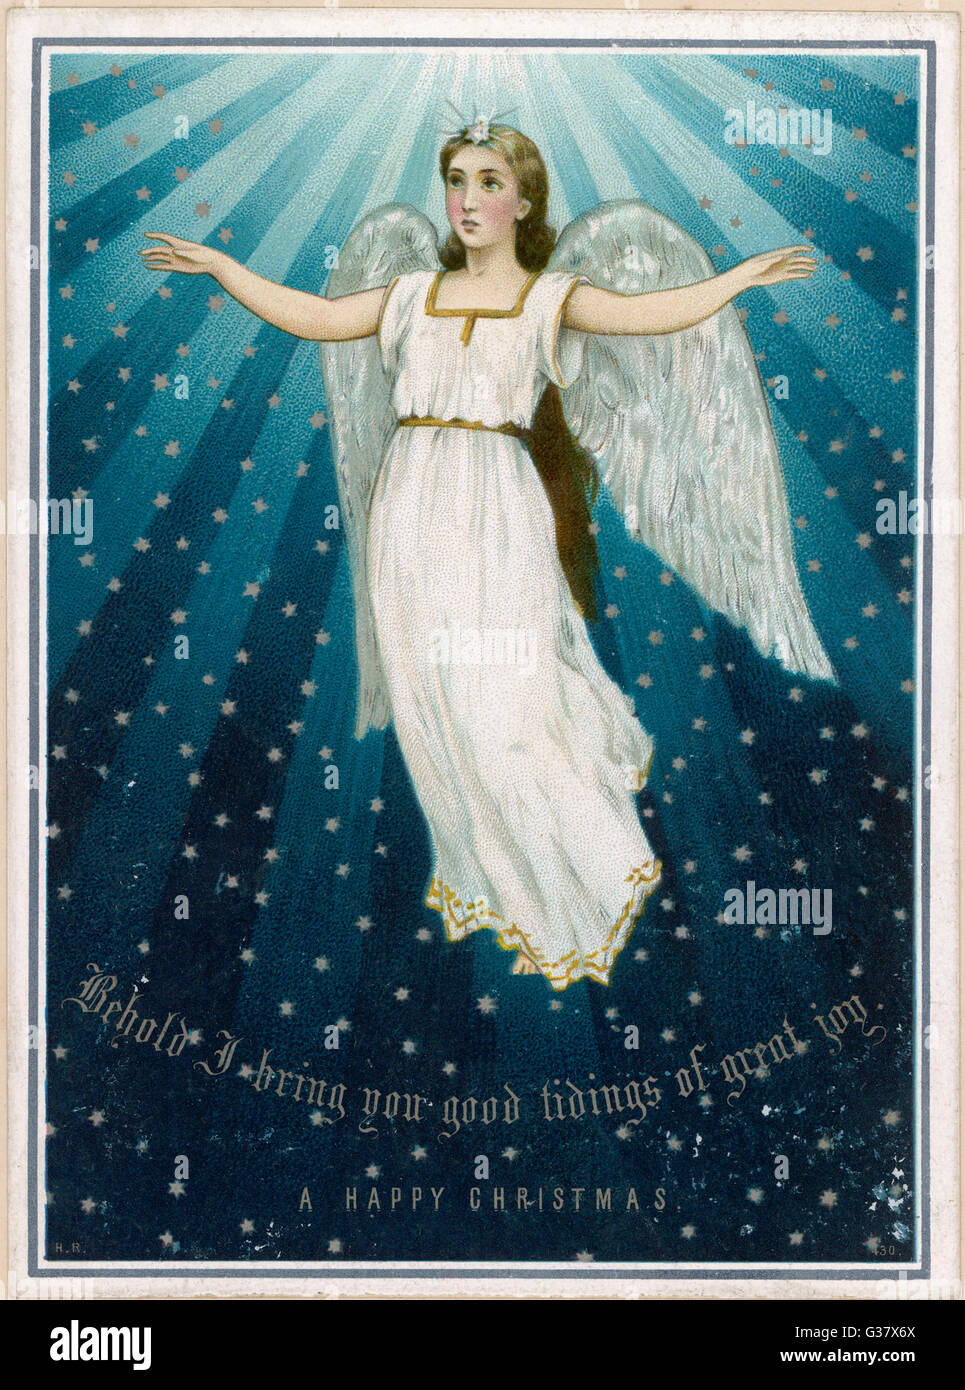 A flying angel among the stars          Date: 1883 Stock Photo